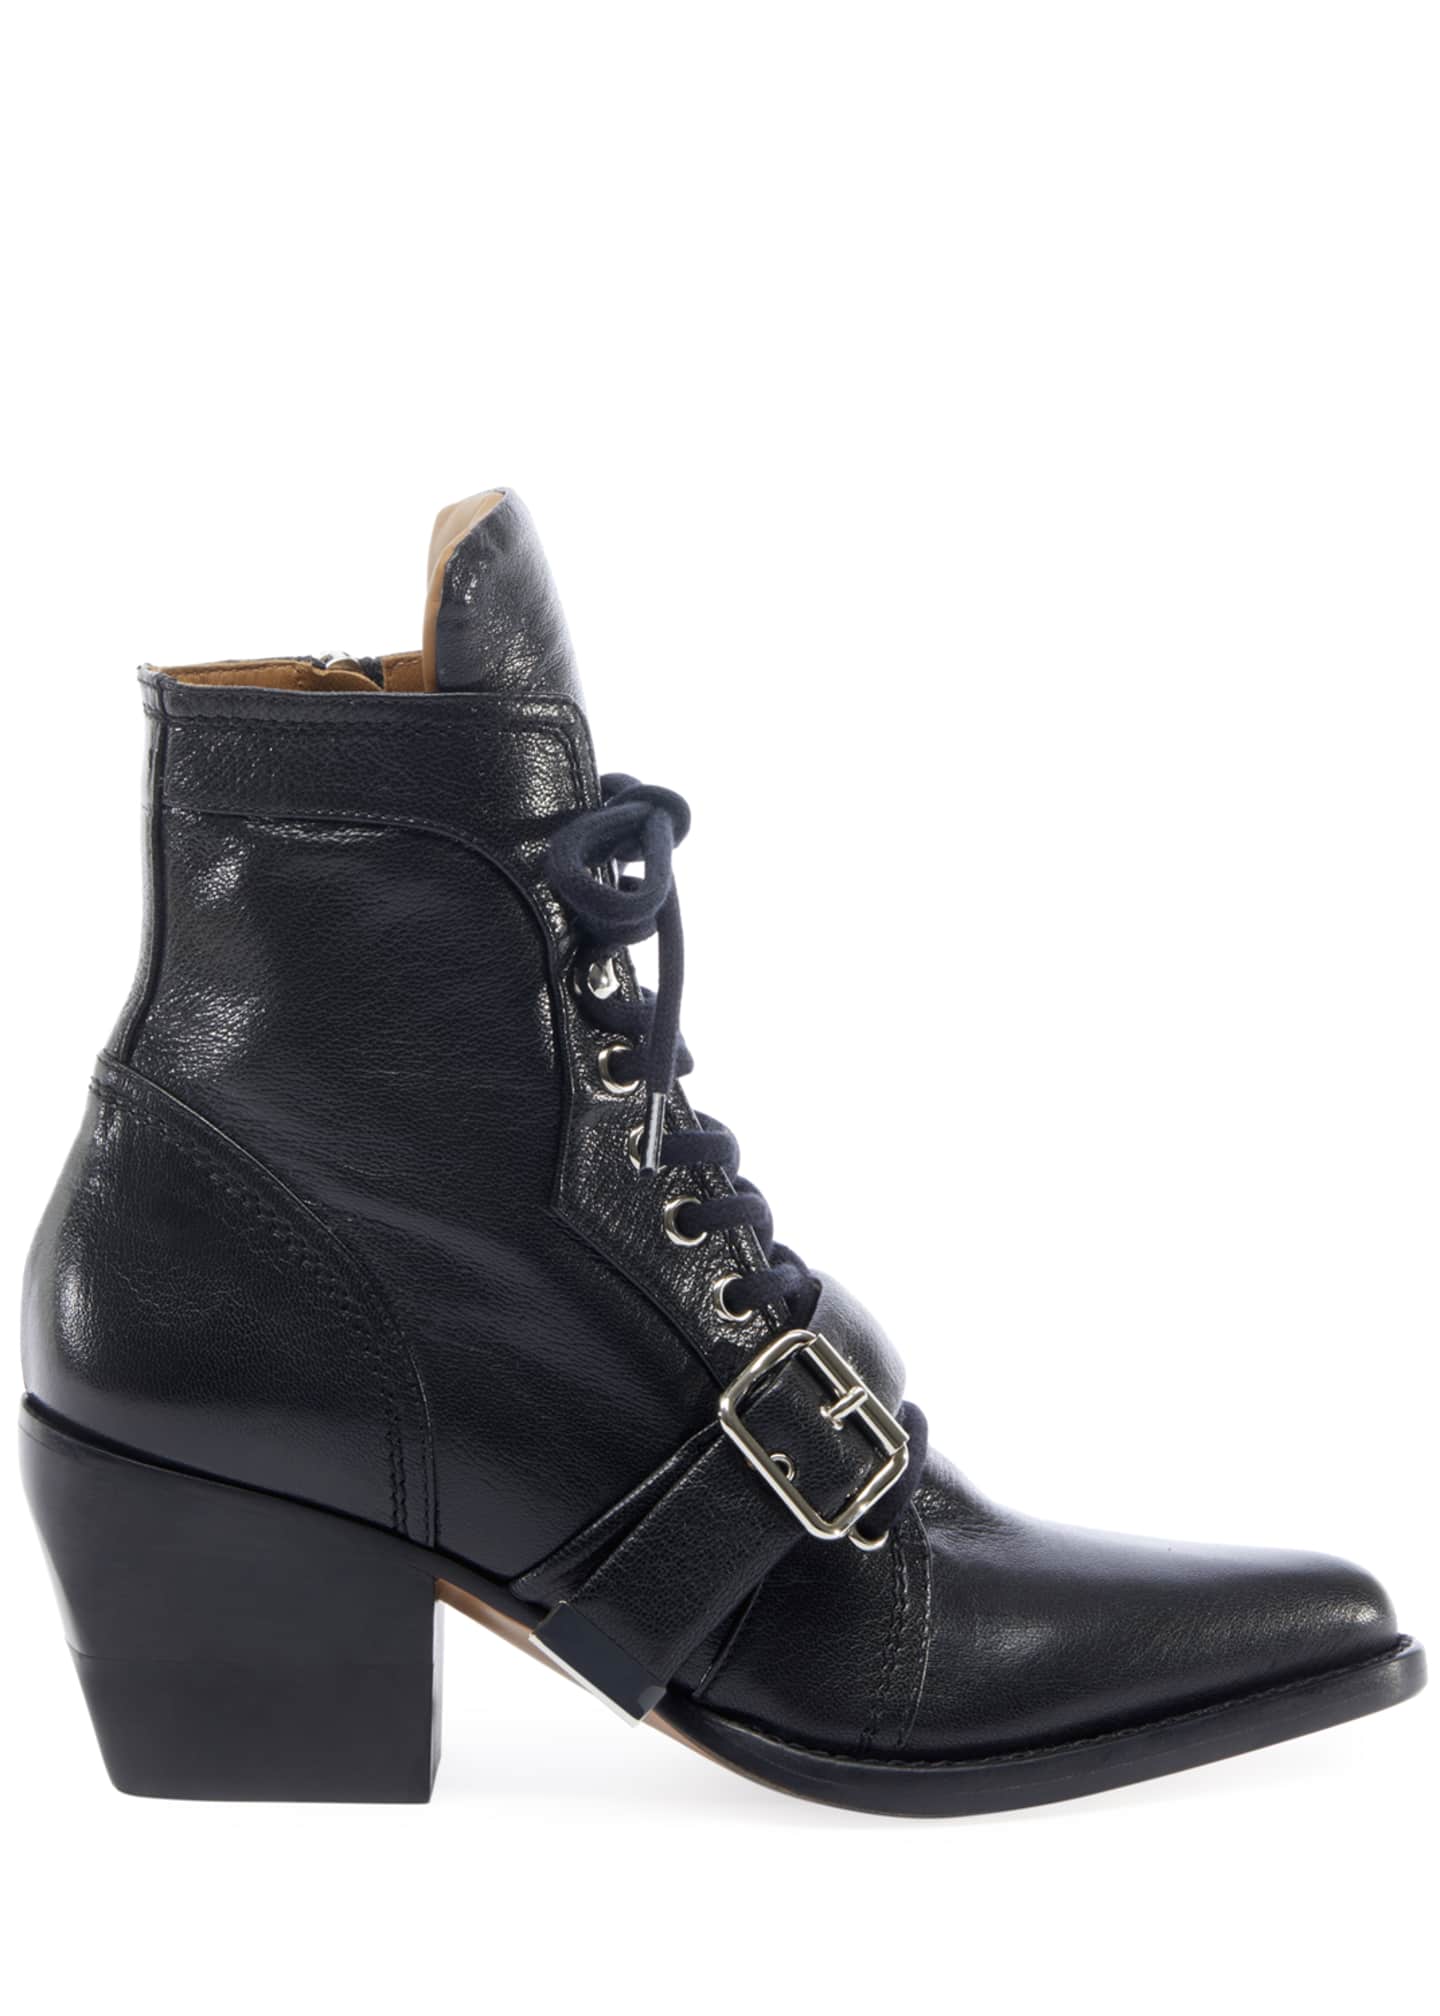 Chloe Rylee Lace-Up Leather Booties - Bergdorf Goodman